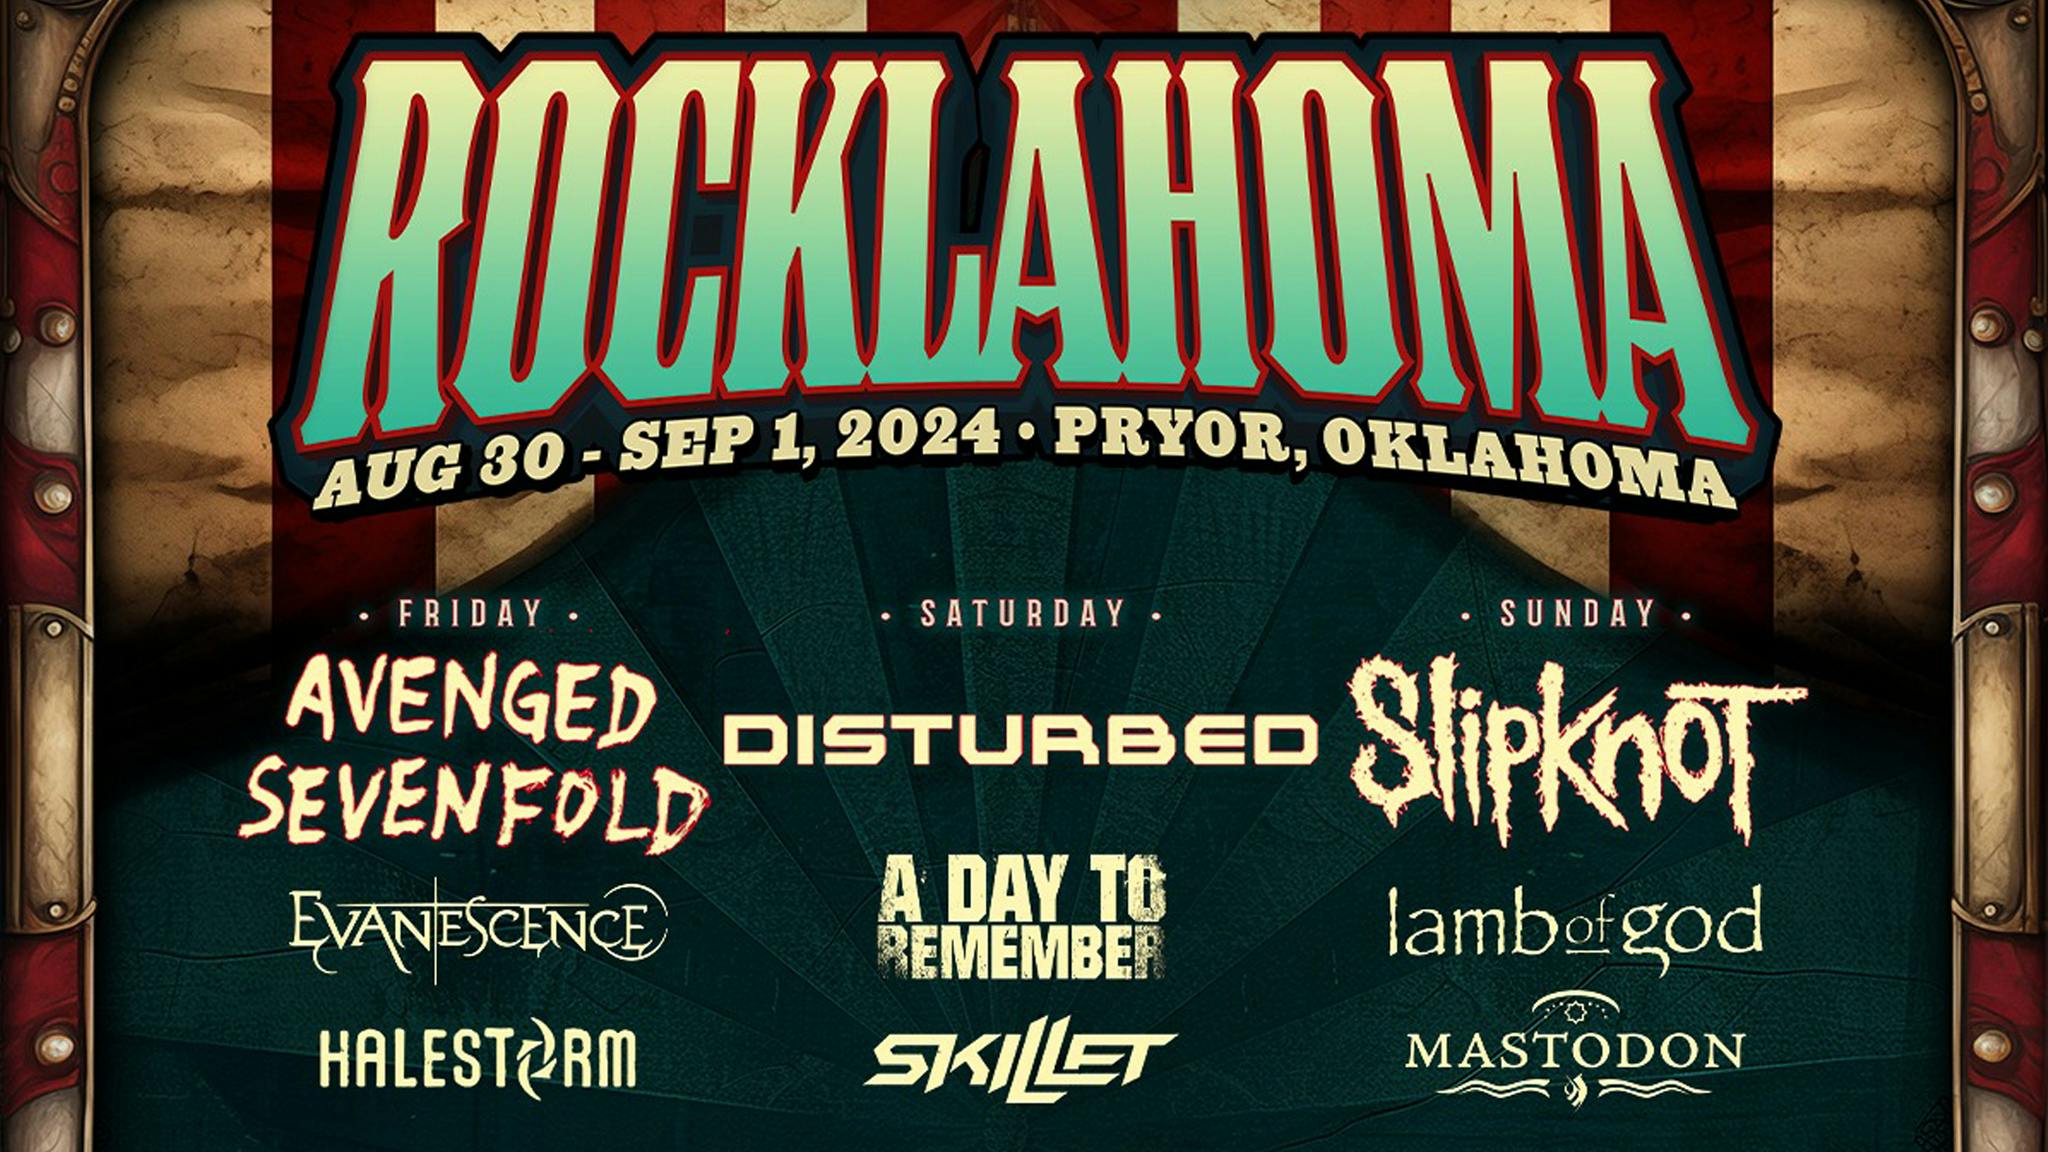 Rocklahoma announces biggest line-up ever with A7X, Evanescence, Slipknot and more